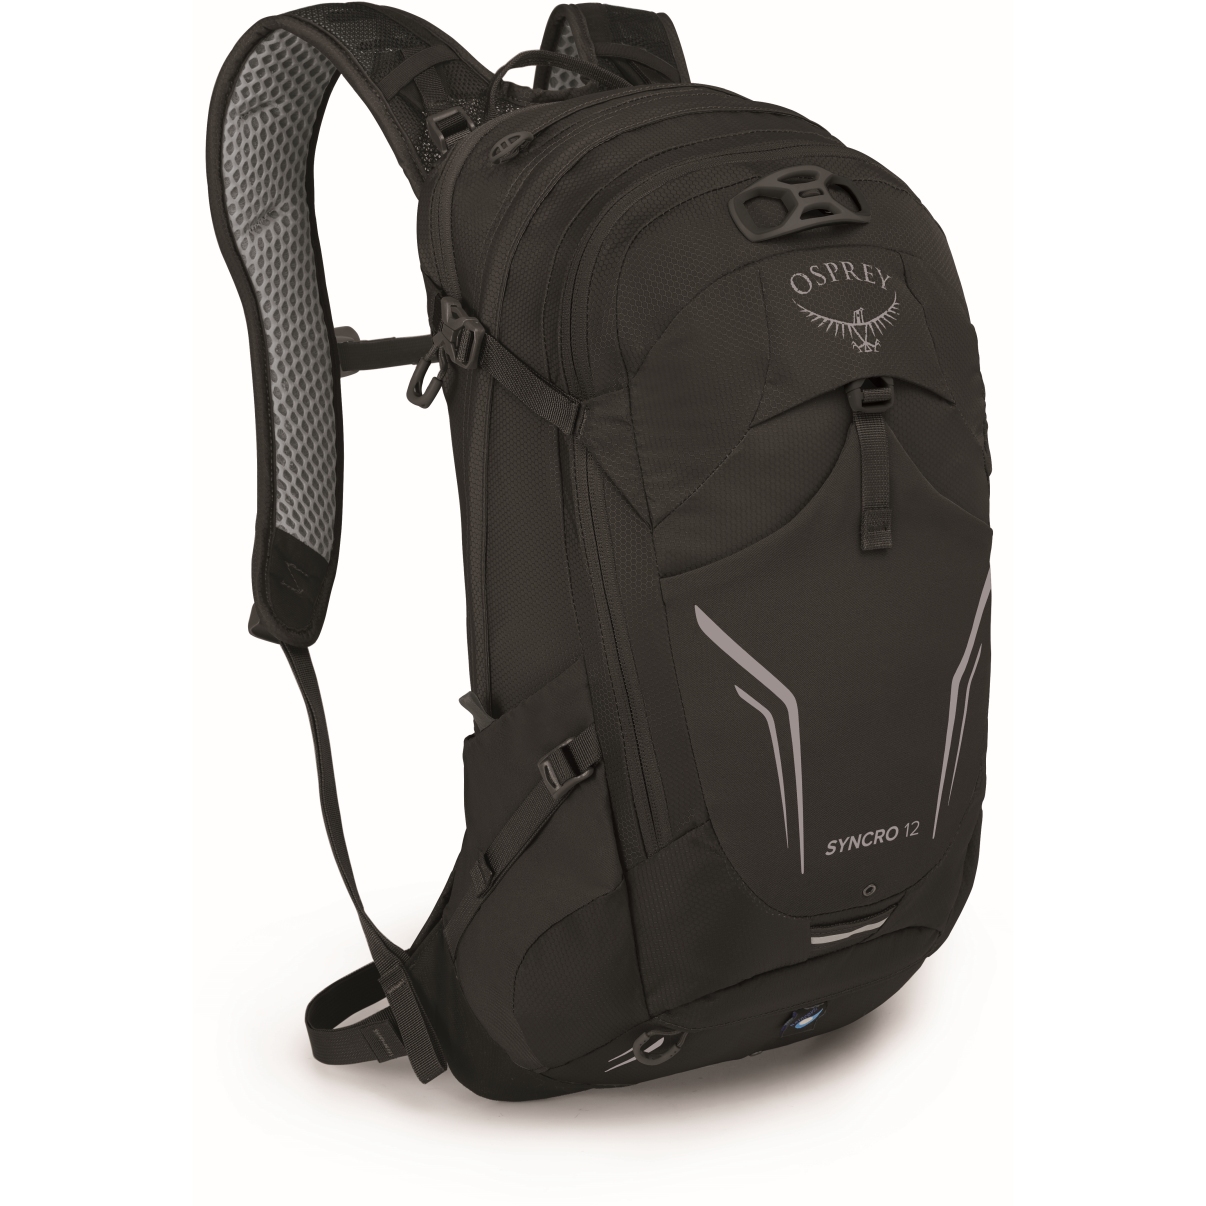 Picture of Osprey Syncro 12 Backpack - Black